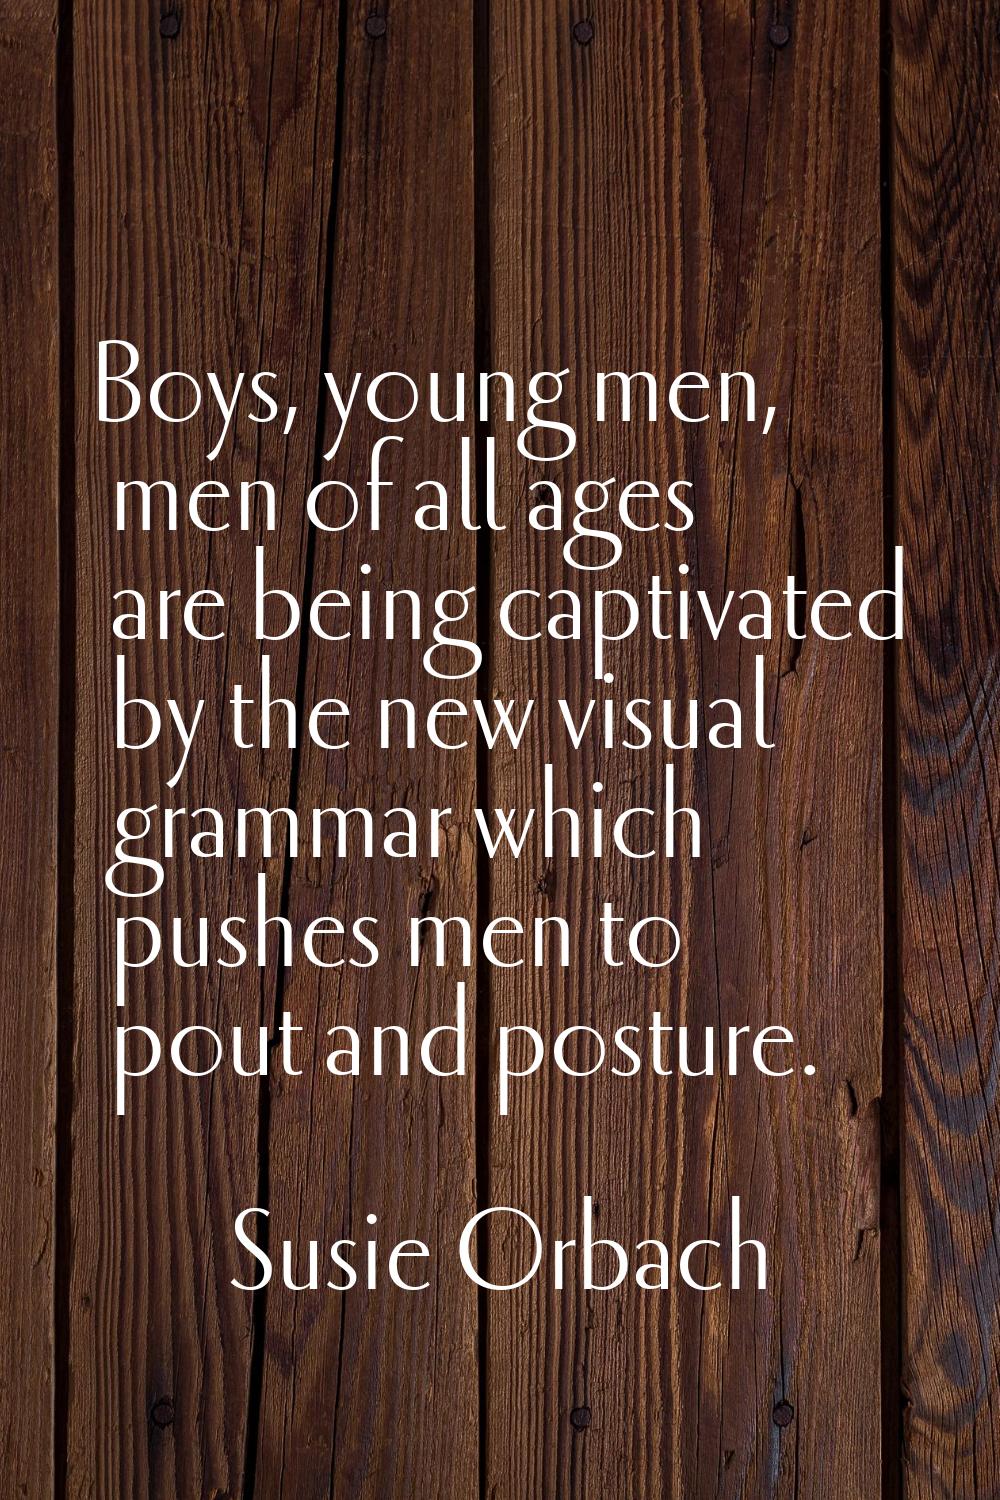 Boys, young men, men of all ages are being captivated by the new visual grammar which pushes men to